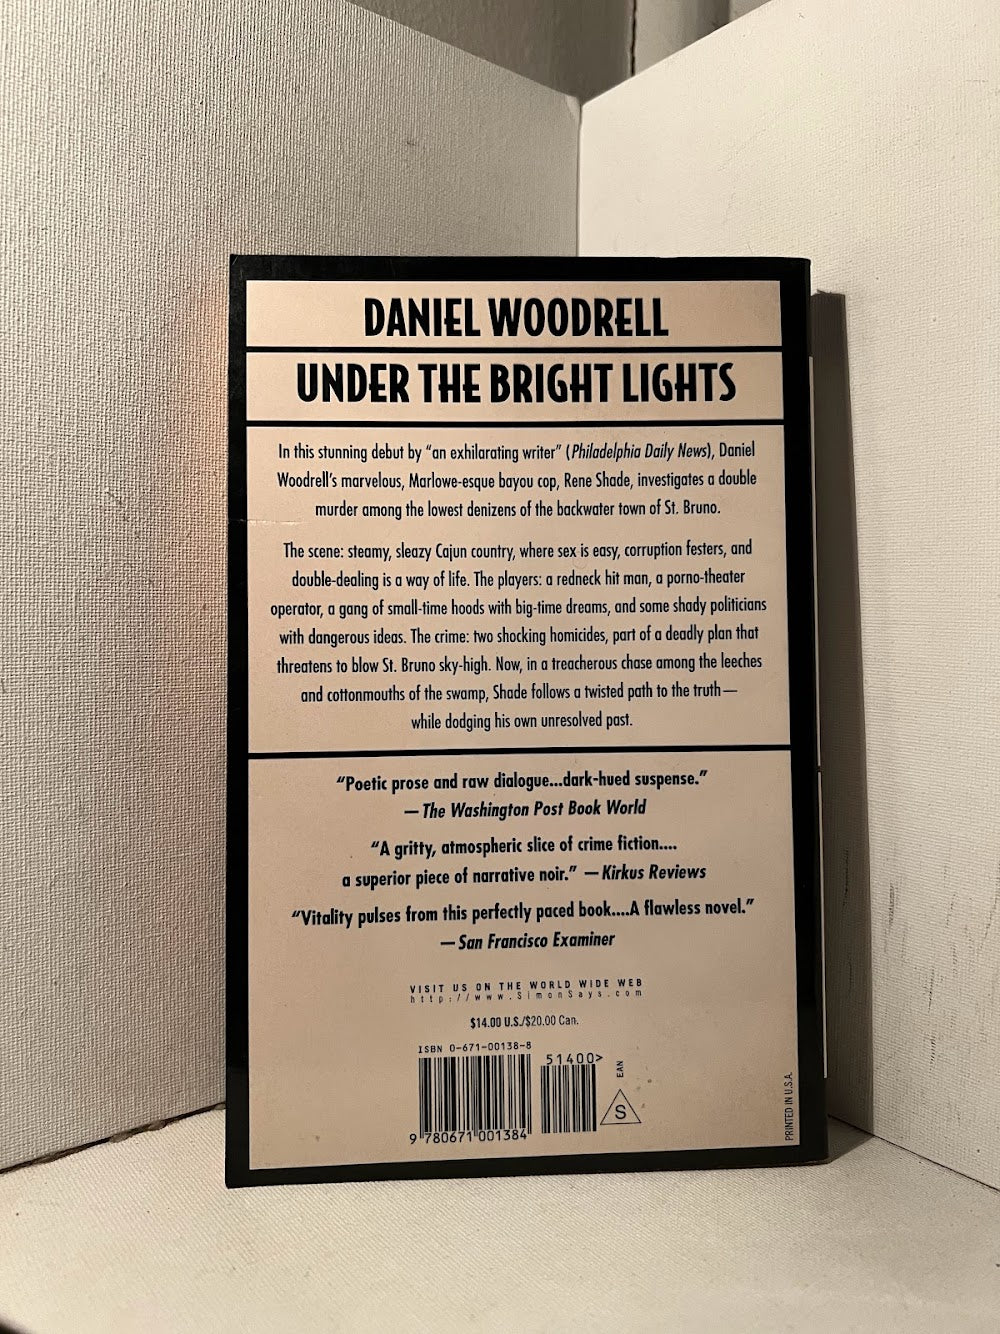 Under the Bright Lights by Daniel Woodrell